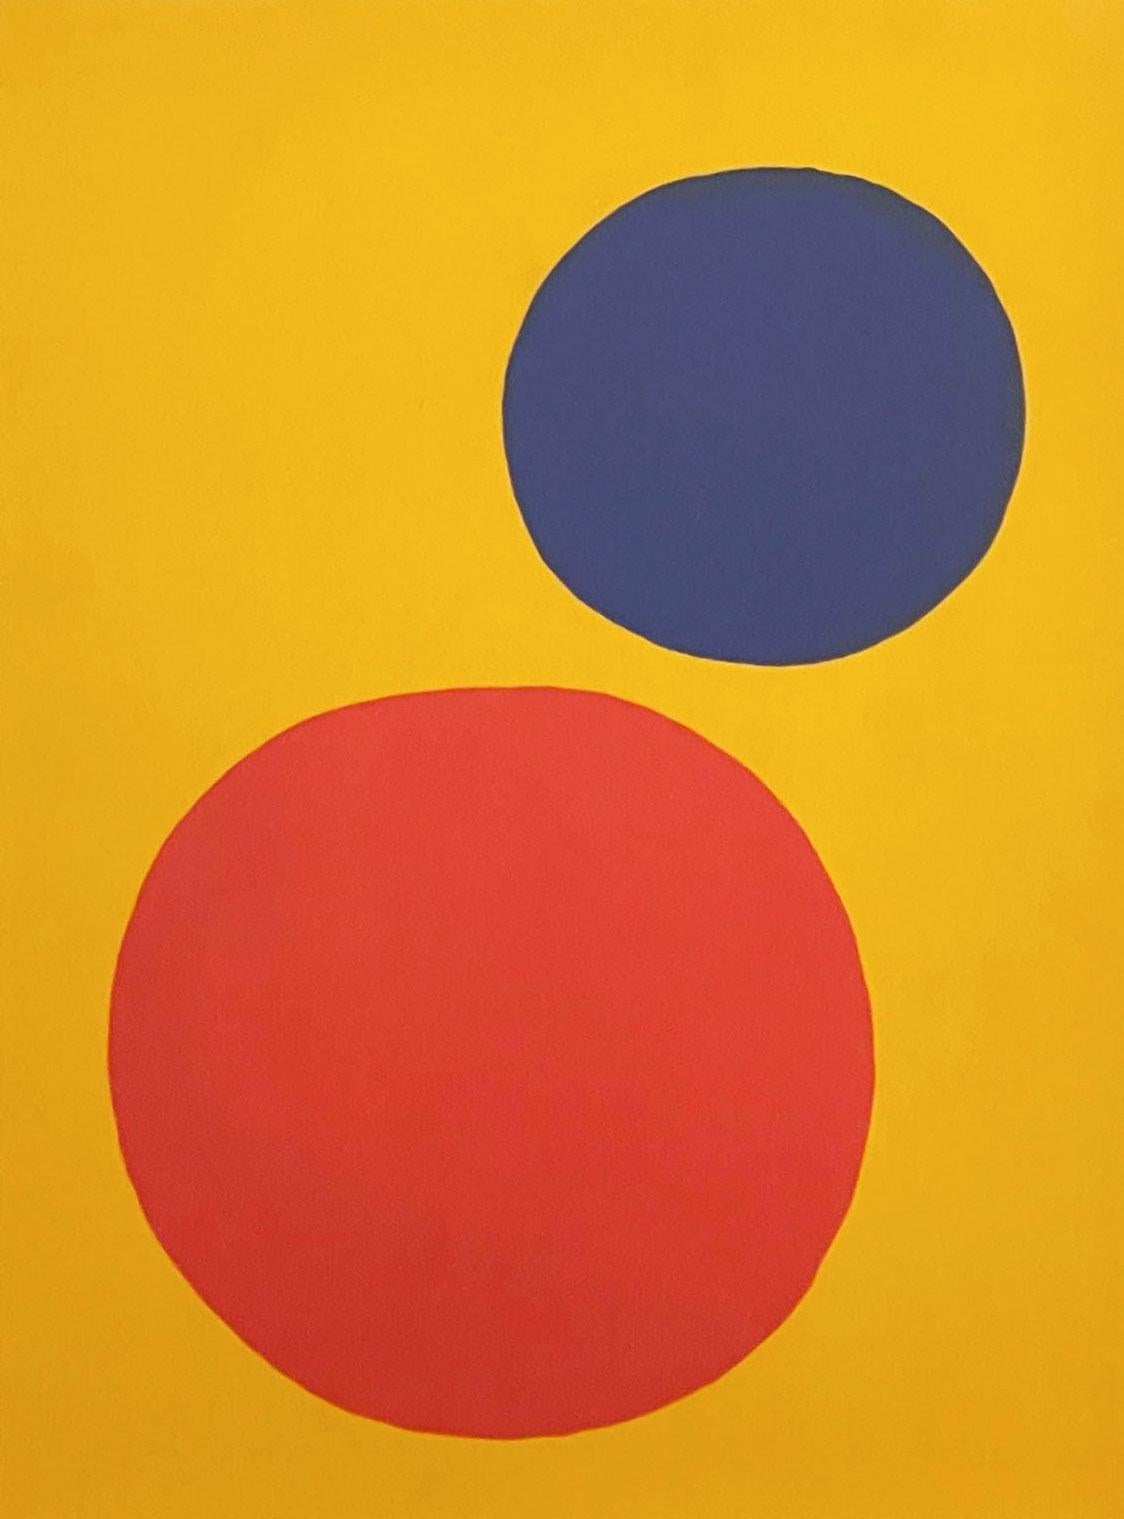 Red and Blue Spheres, from Derriere le Miroir #201 - Print by Alexander Calder